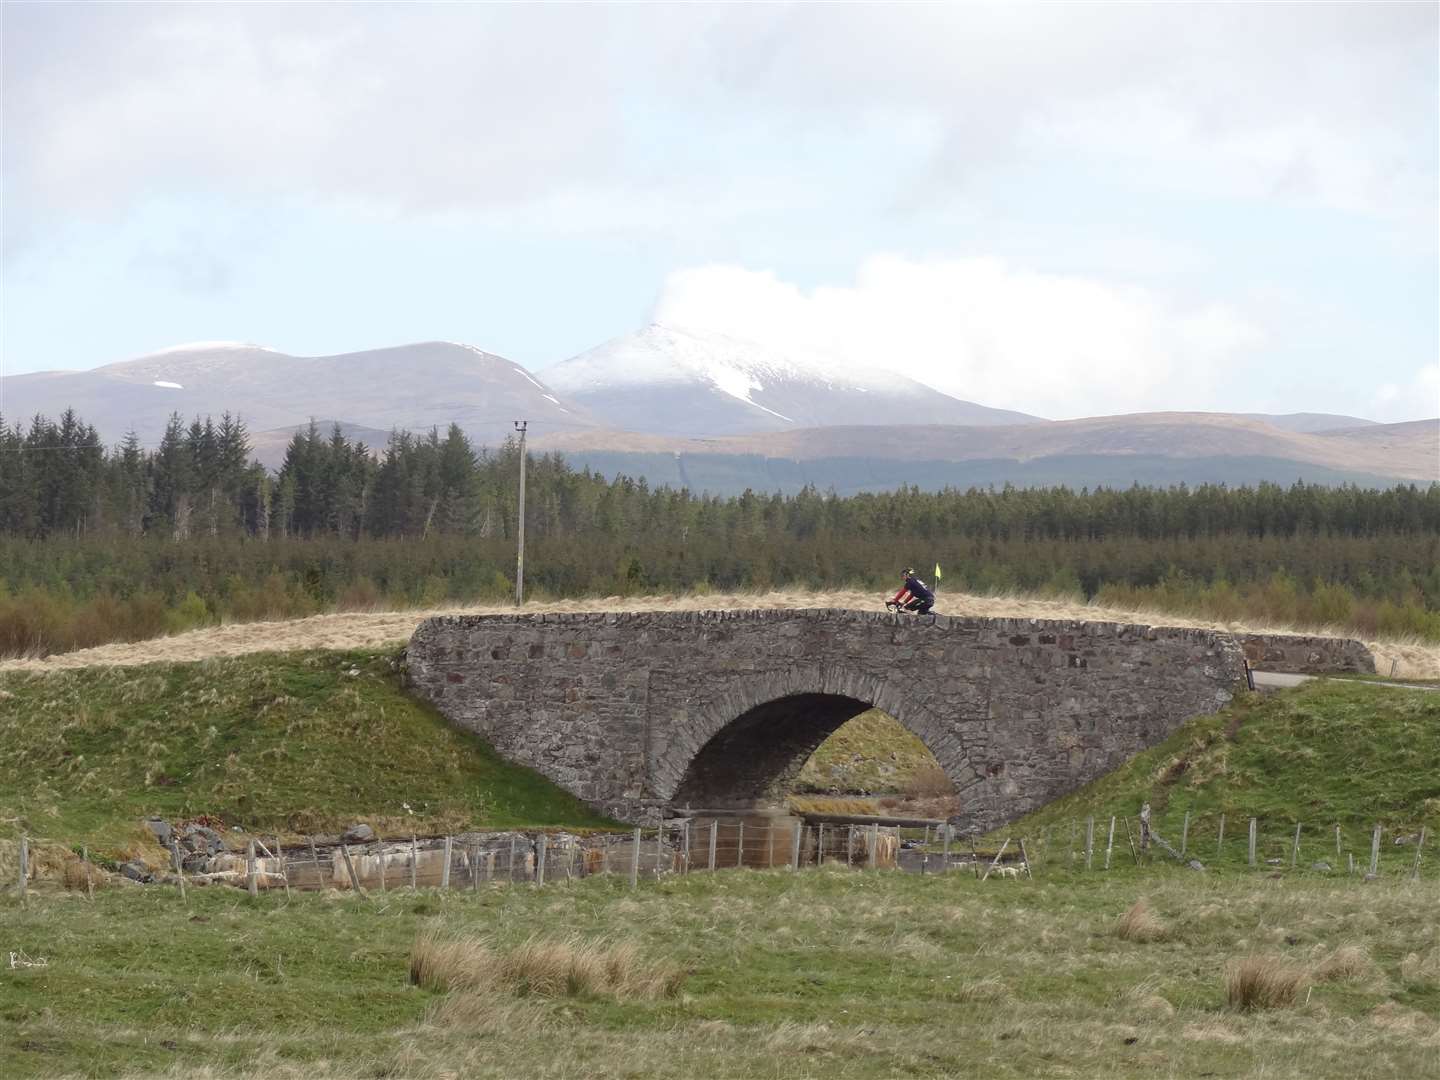 The Lairg to Altnaharra road in the northern Highlands will no longer be part of the National Cycle Network – but will be promoted as part of a touring route.